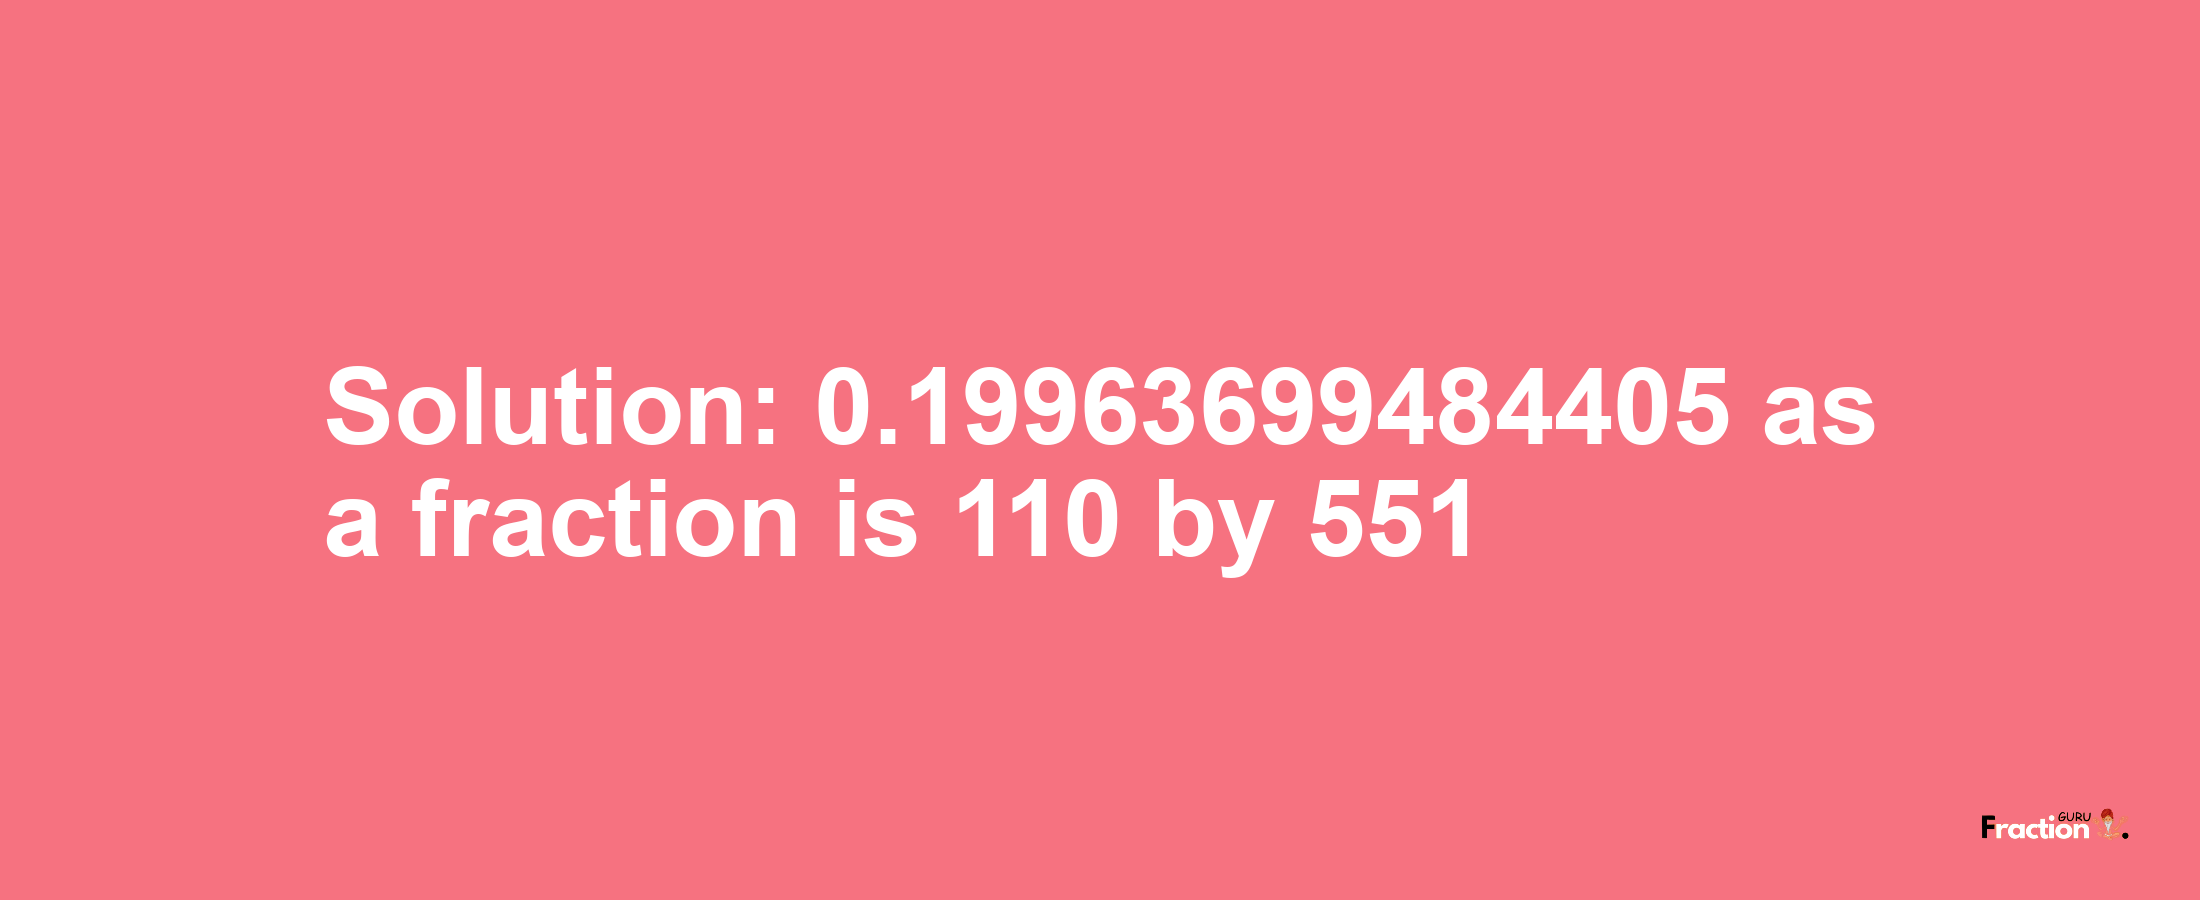 Solution:0.19963699484405 as a fraction is 110/551